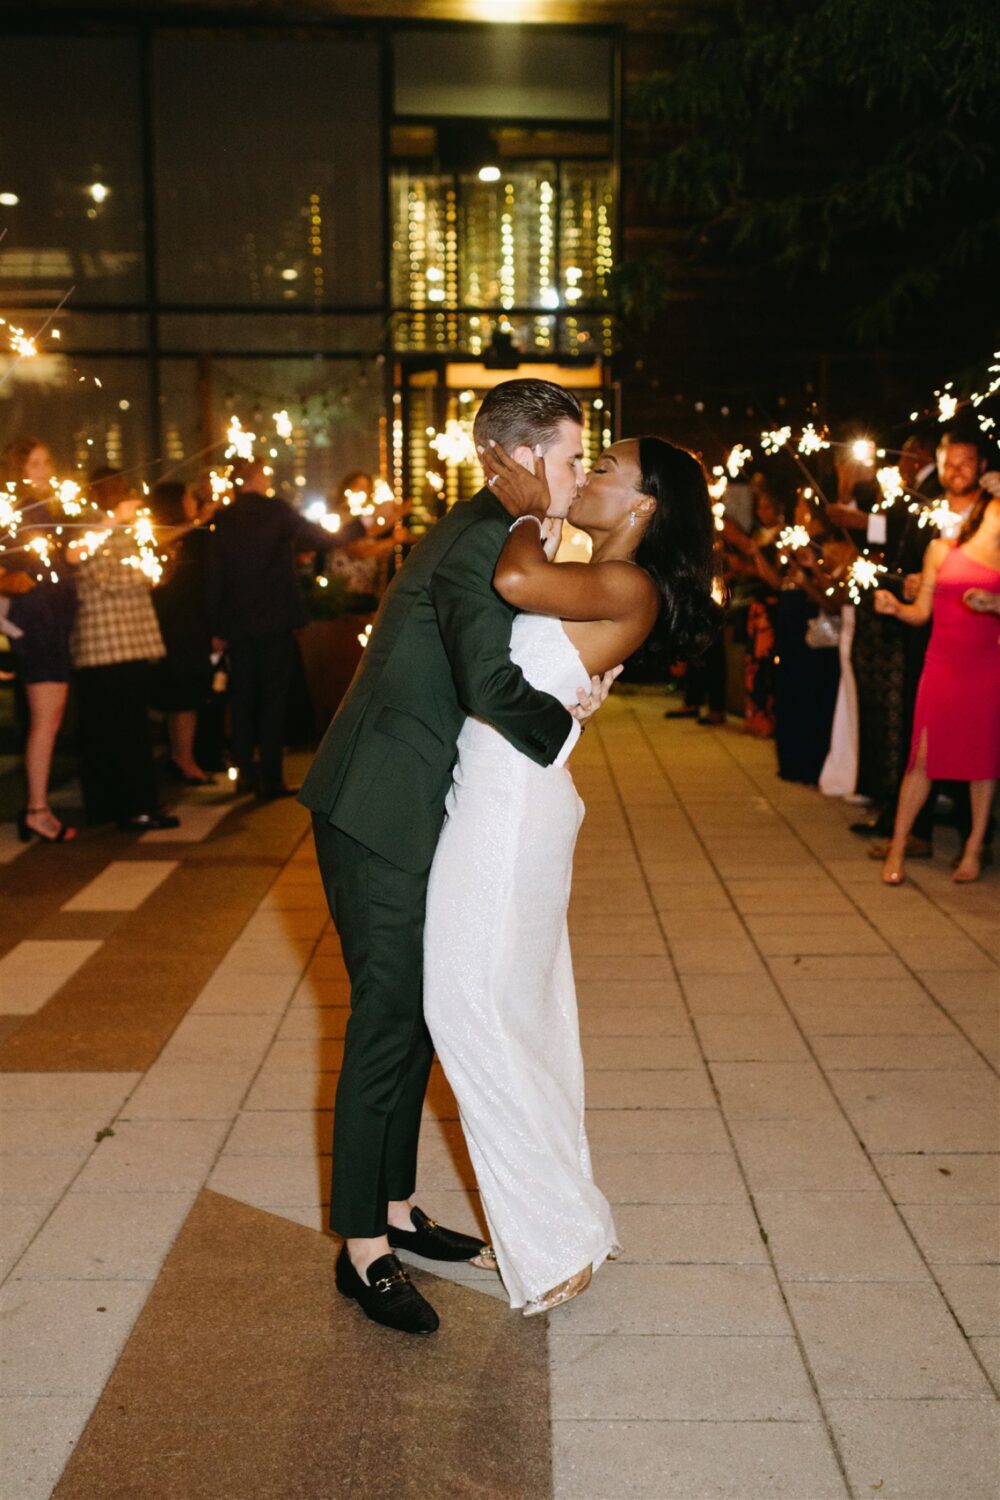 bride and groom firework wedding exit kissing at end of aisle